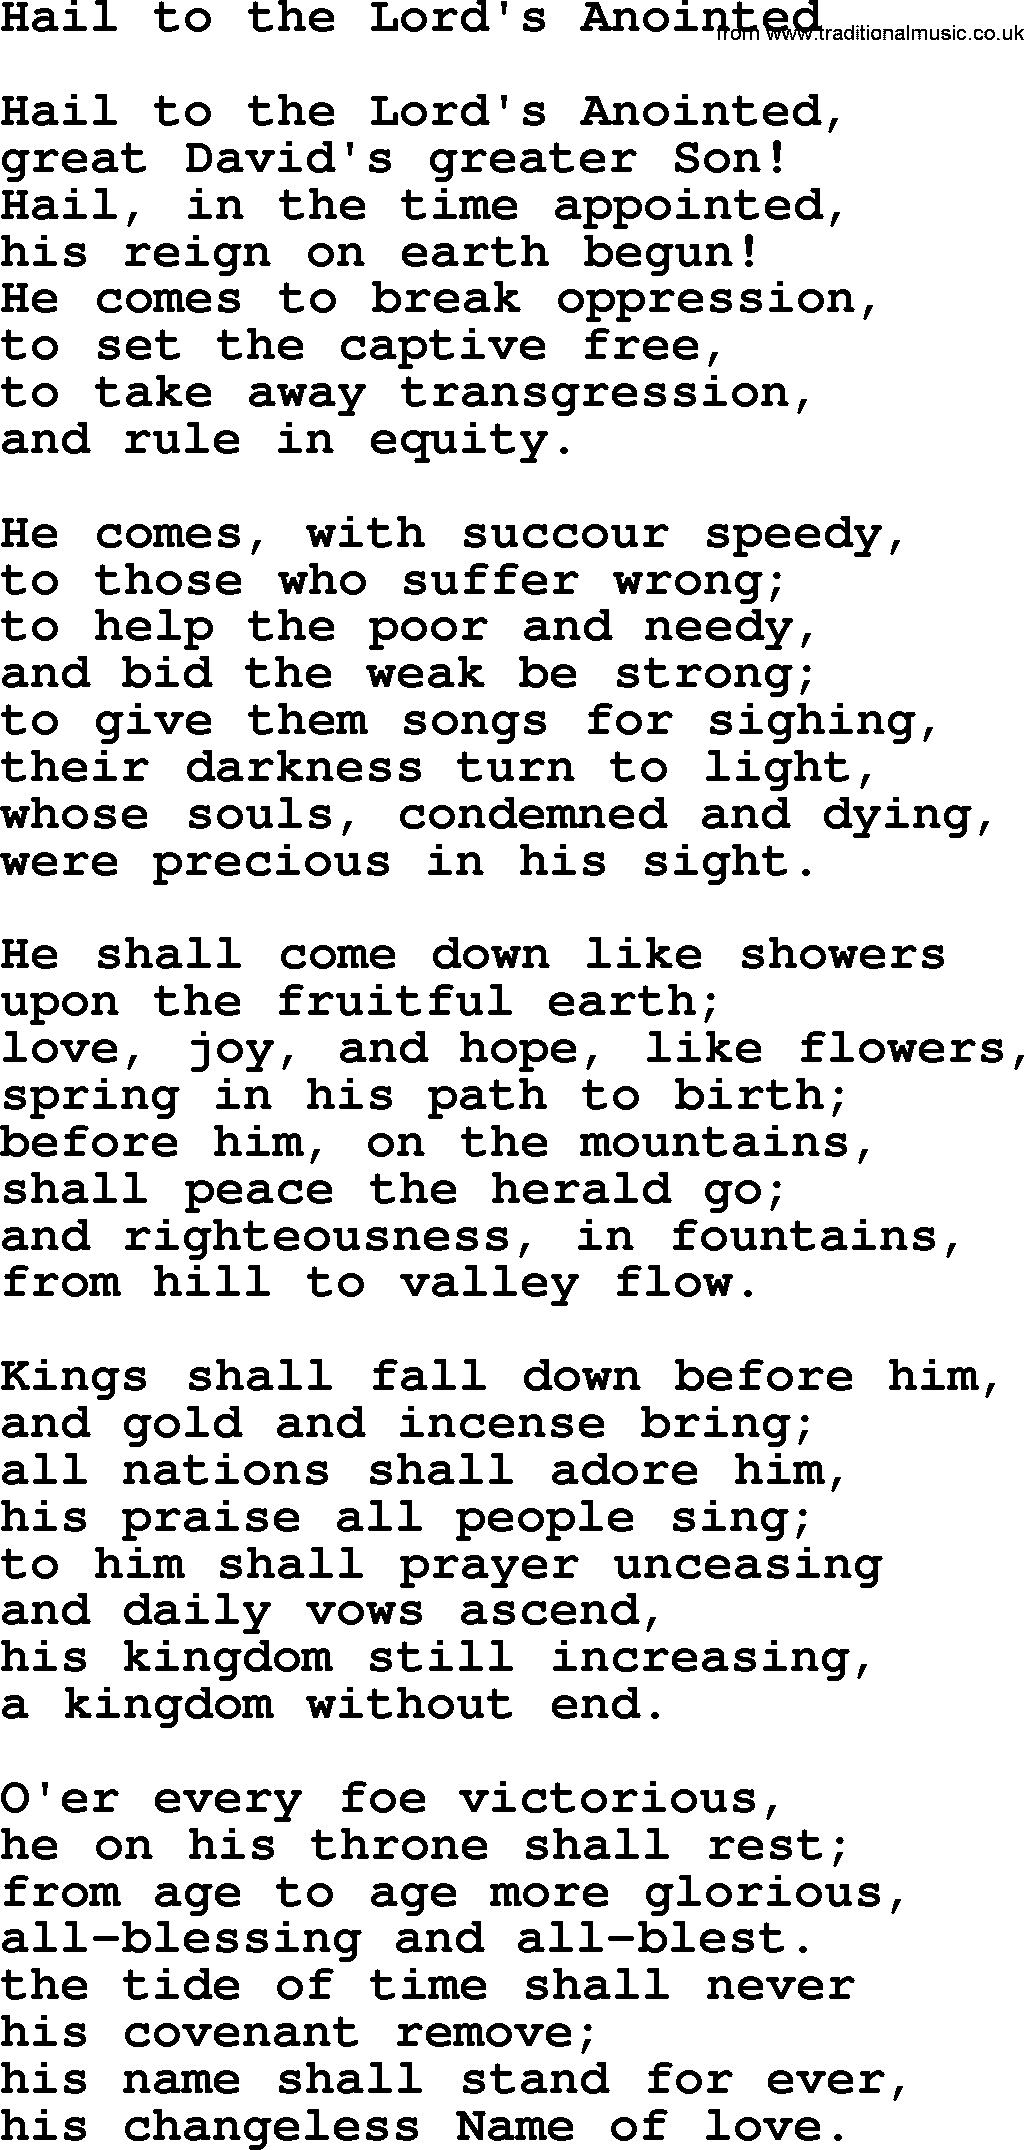 Christmas Hymns, Carols and Songs, title: Hail To The Lord's Anointed, lyrics with PDF